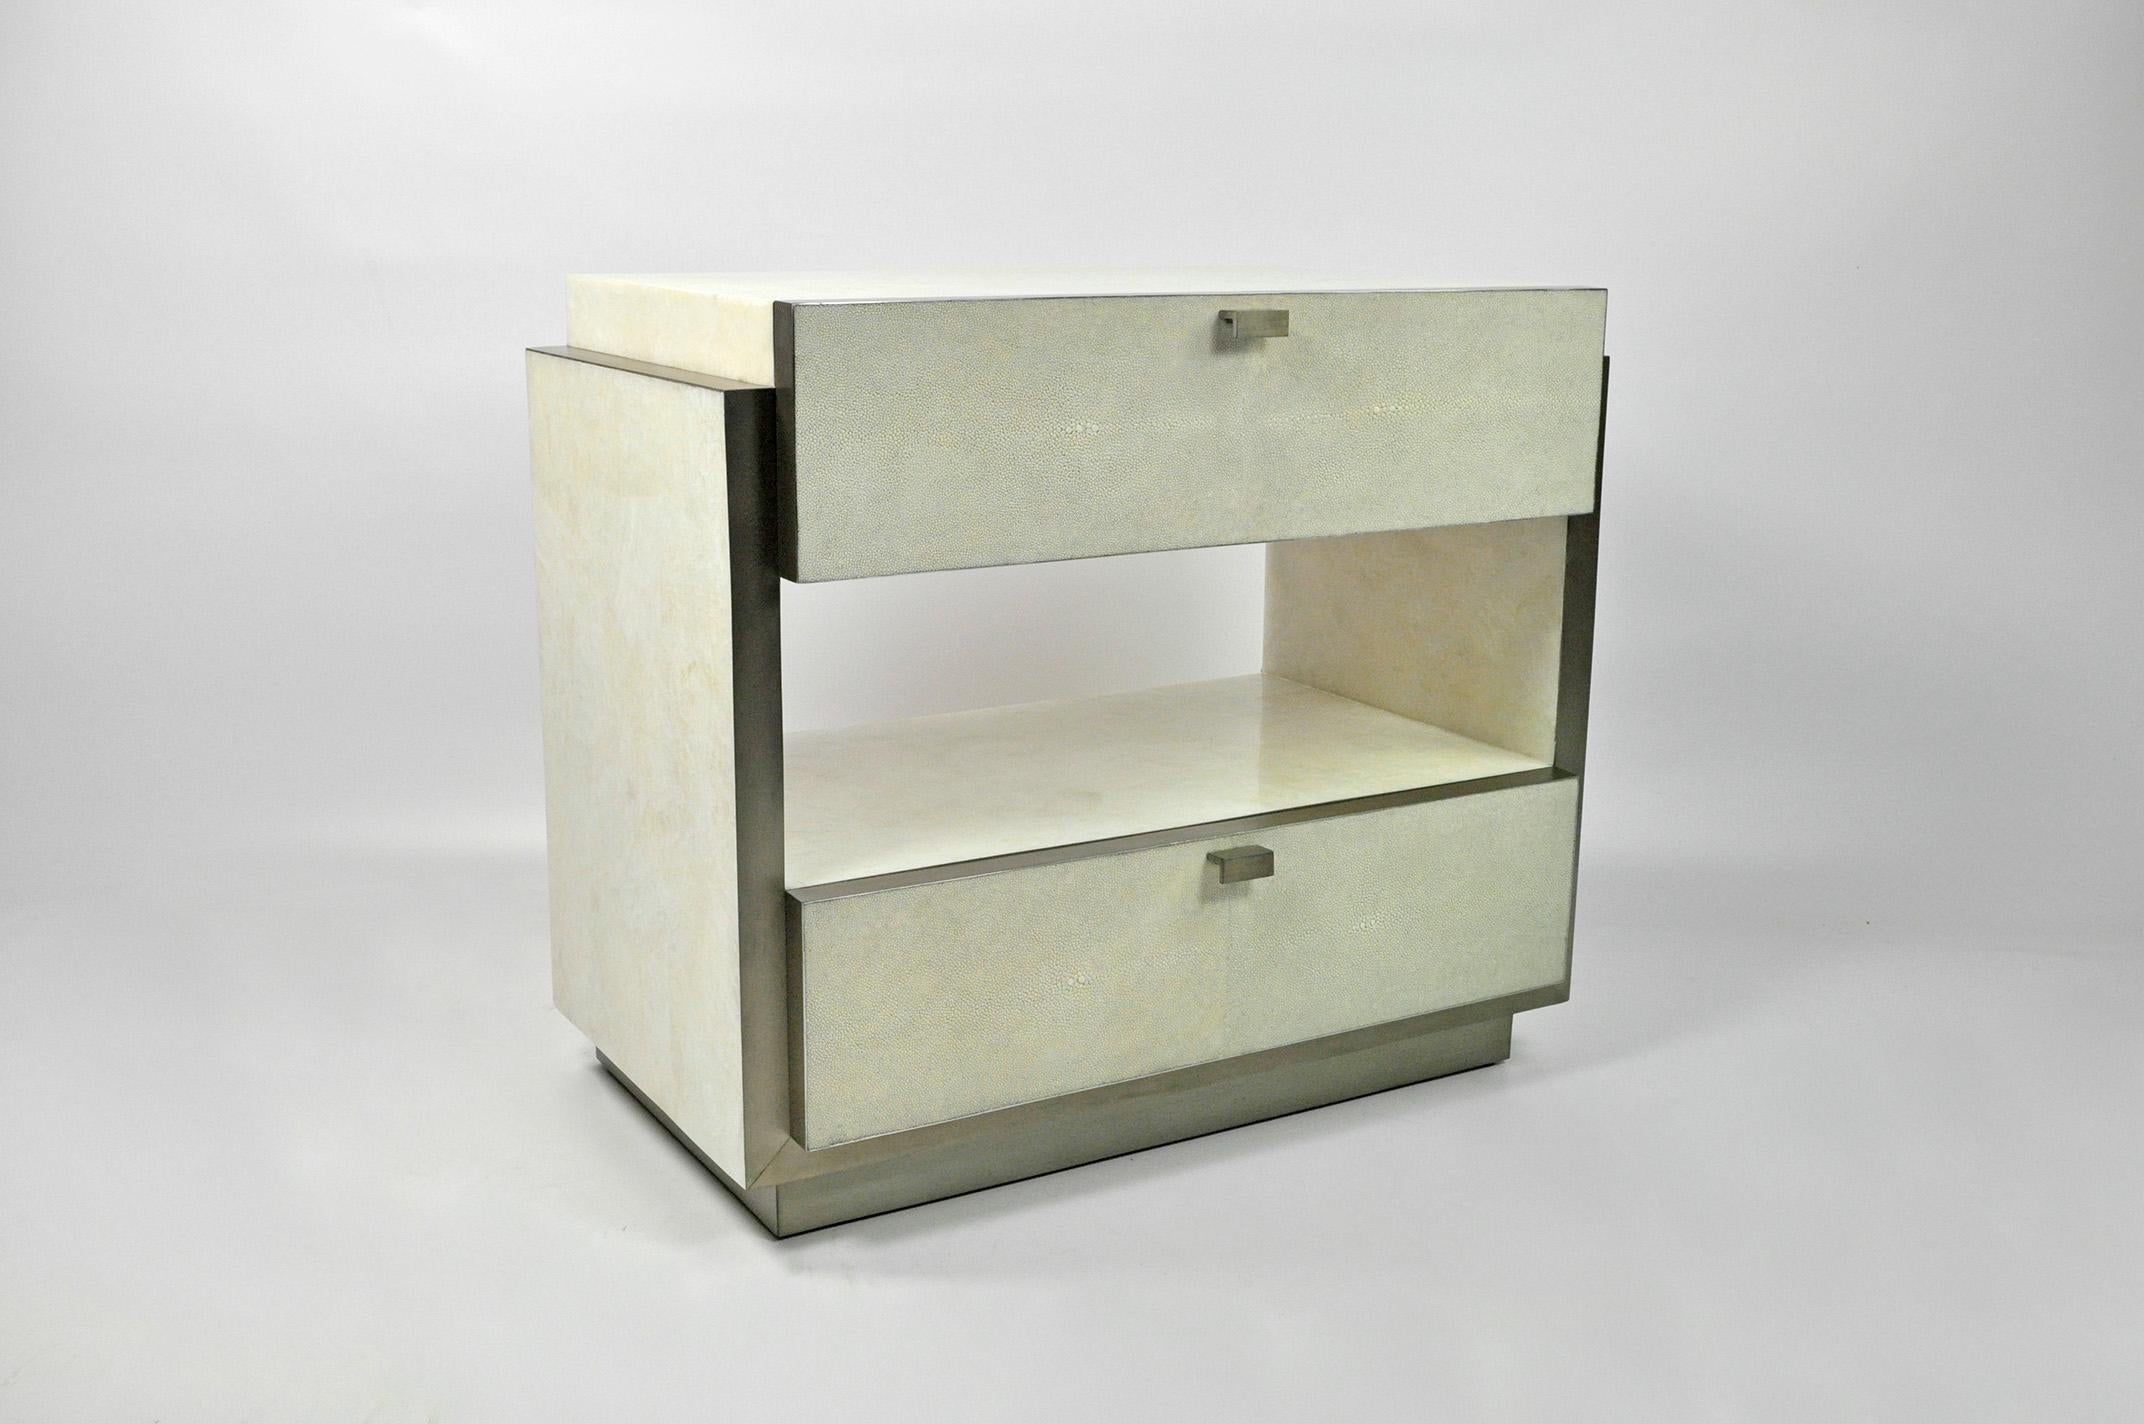 This rectangular bedside table has two drawers and it is made of white rock crystal marquetry with shagreen drawers.
The edges and the base have brushed stainless steel trims.
The handles are in stainless steel.

The dimensions of this piece are